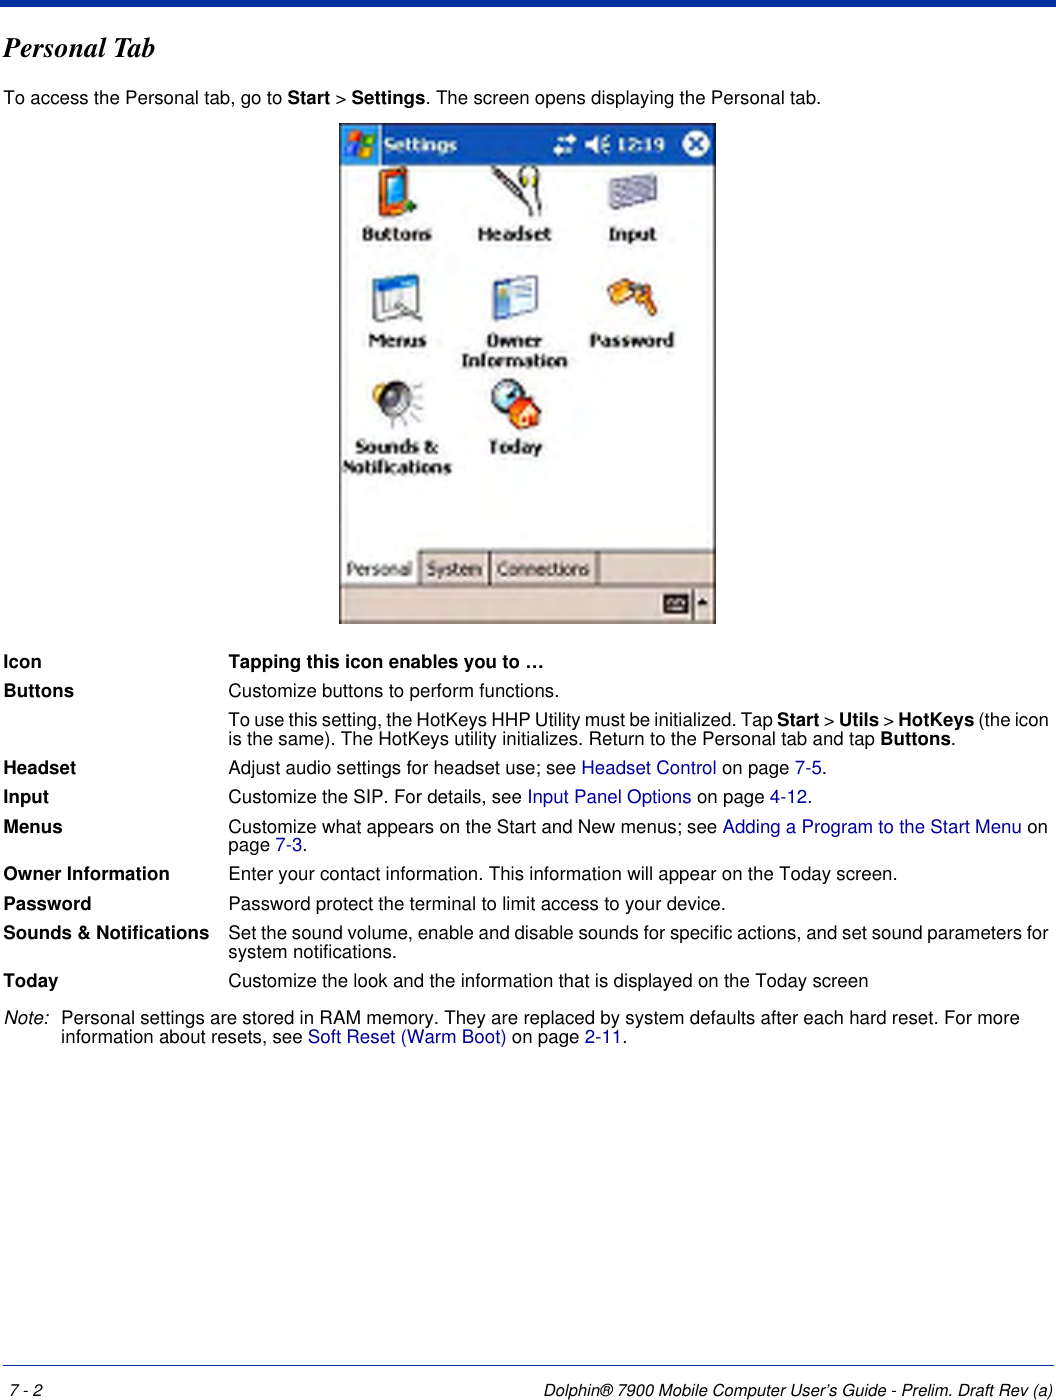 7 - 2 Dolphin® 7900 Mobile Computer User’s Guide - Prelim. Draft Rev (a)Personal TabTo access the Personal tab, go to Start &gt; Settings. The screen opens displaying the Personal tab.Icon Tapping this icon enables you to …Buttons Customize buttons to perform functions. To use this setting, the HotKeys HHP Utility must be initialized. Tap Start &gt; Utils &gt; HotKeys (the icon is the same). The HotKeys utility initializes. Return to the Personal tab and tap Buttons.Headset Adjust audio settings for headset use; see Headset Control on page 7-5.Input Customize the SIP. For details, see Input Panel Options on page 4-12.Menus Customize what appears on the Start and New menus; see Adding a Program to the Start Menu on page 7-3. Owner Information Enter your contact information. This information will appear on the Today screen.Password Password protect the terminal to limit access to your device. Sounds &amp; Notifications Set the sound volume, enable and disable sounds for specific actions, and set sound parameters for system notifications.Today Customize the look and the information that is displayed on the Today screenNote: Personal settings are stored in RAM memory. They are replaced by system defaults after each hard reset. For more information about resets, see Soft Reset (Warm Boot) on page 2-11.